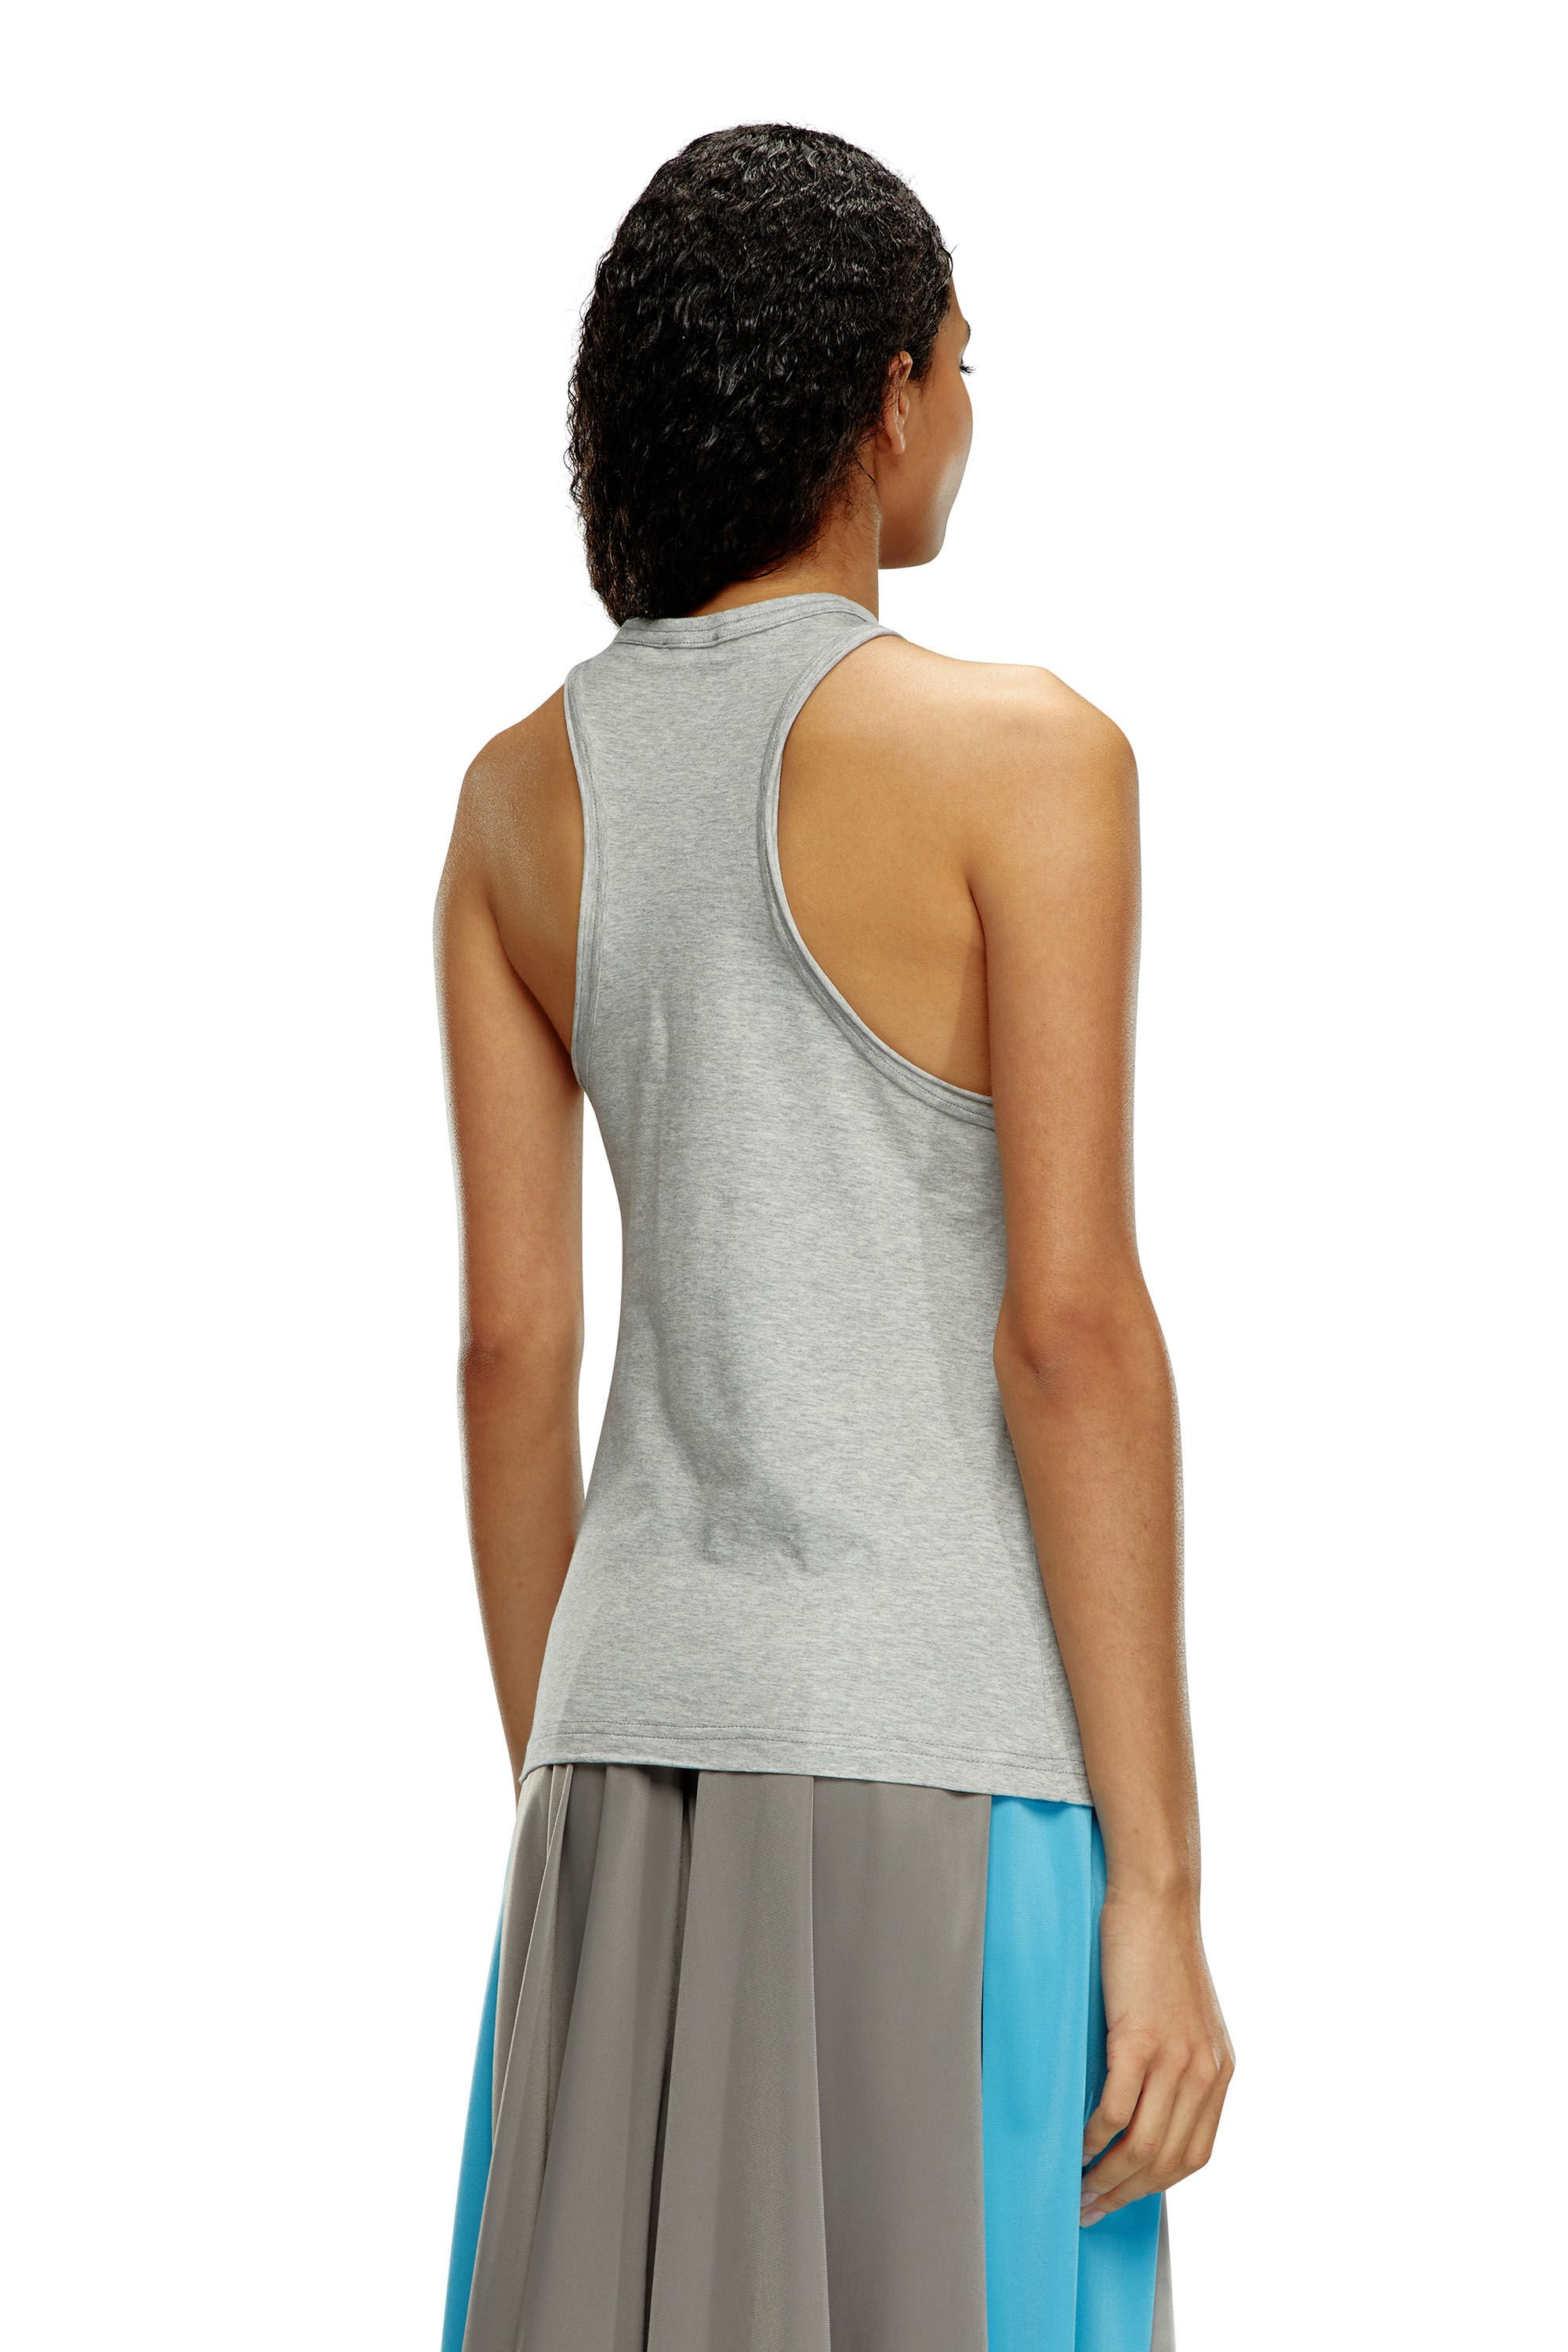 Women's College tank top with twisted front | Grey | Diesel